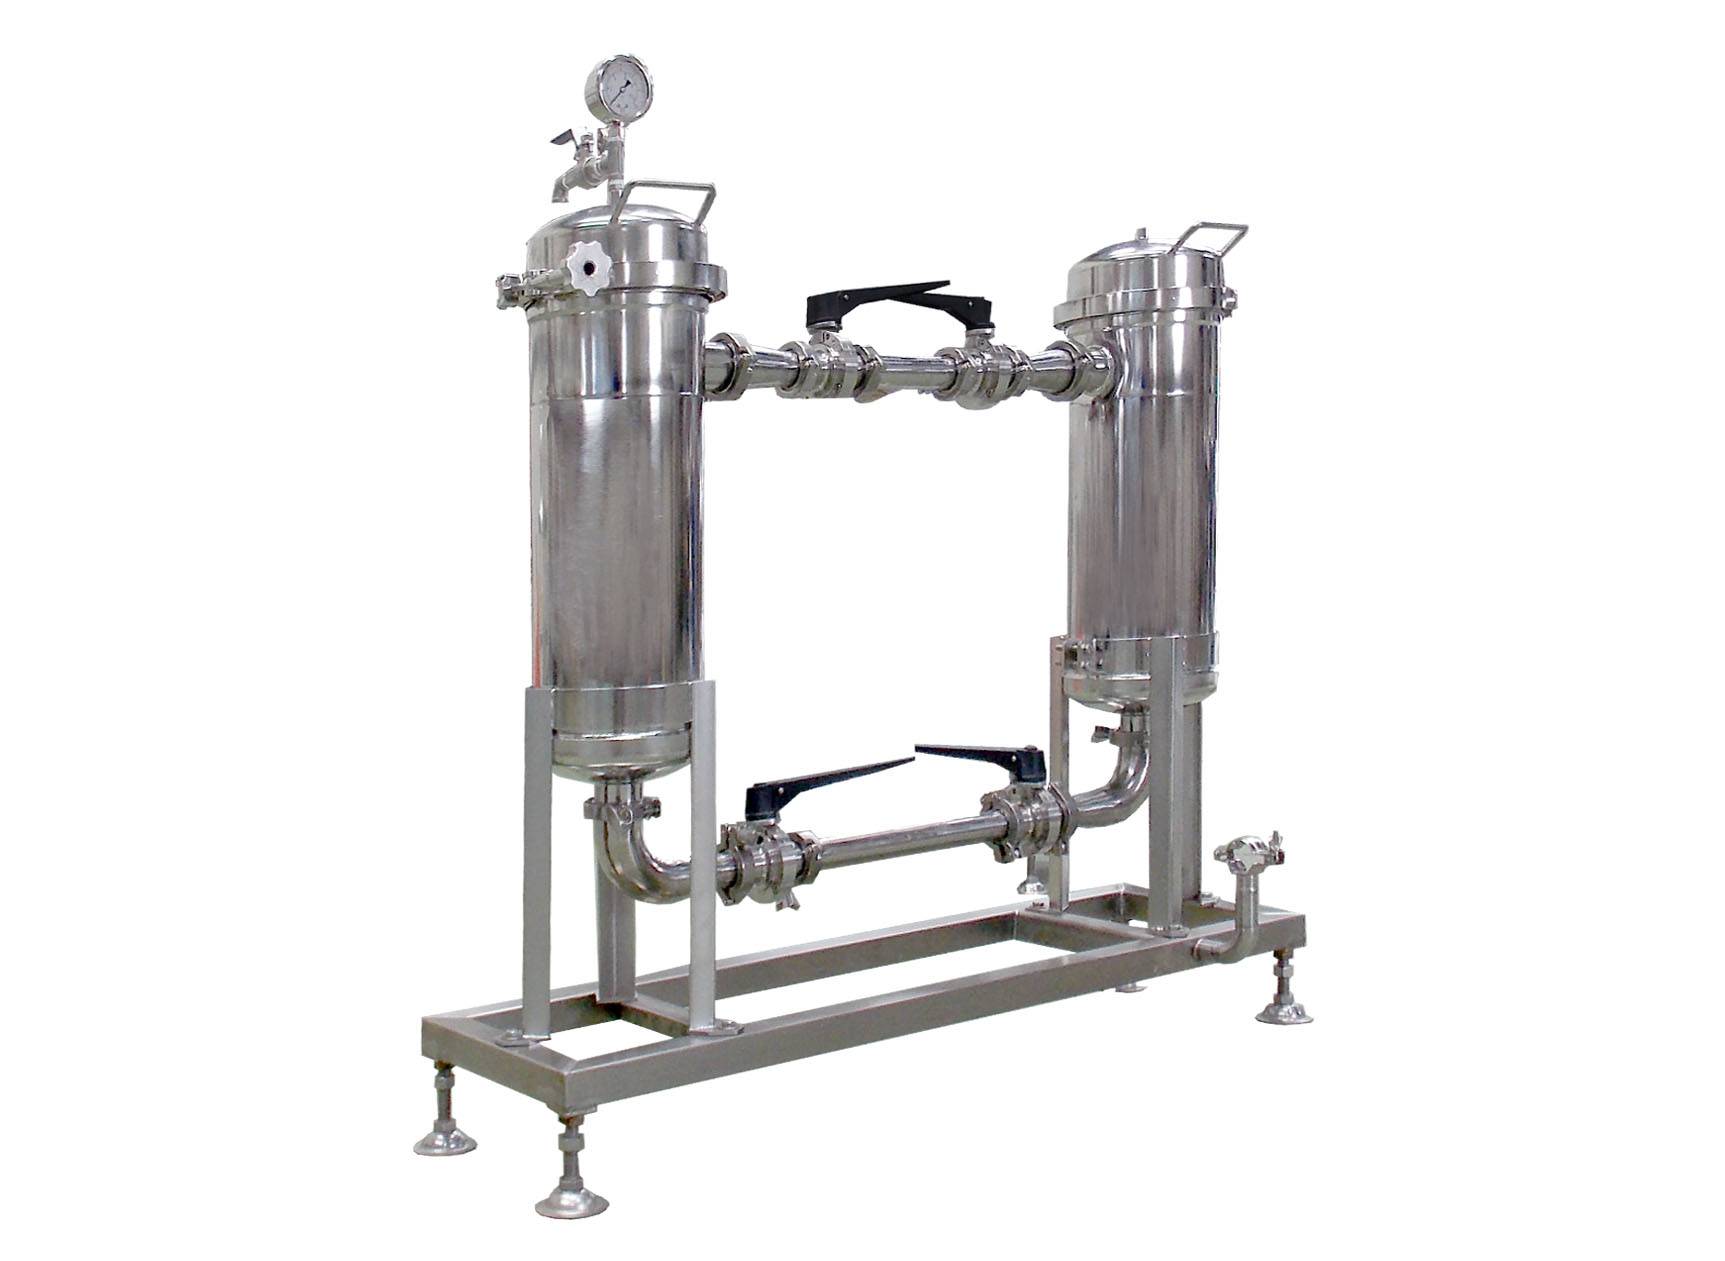 Soy Milk Filter is one of the machines in the Fresh Soy Milk Production Line.